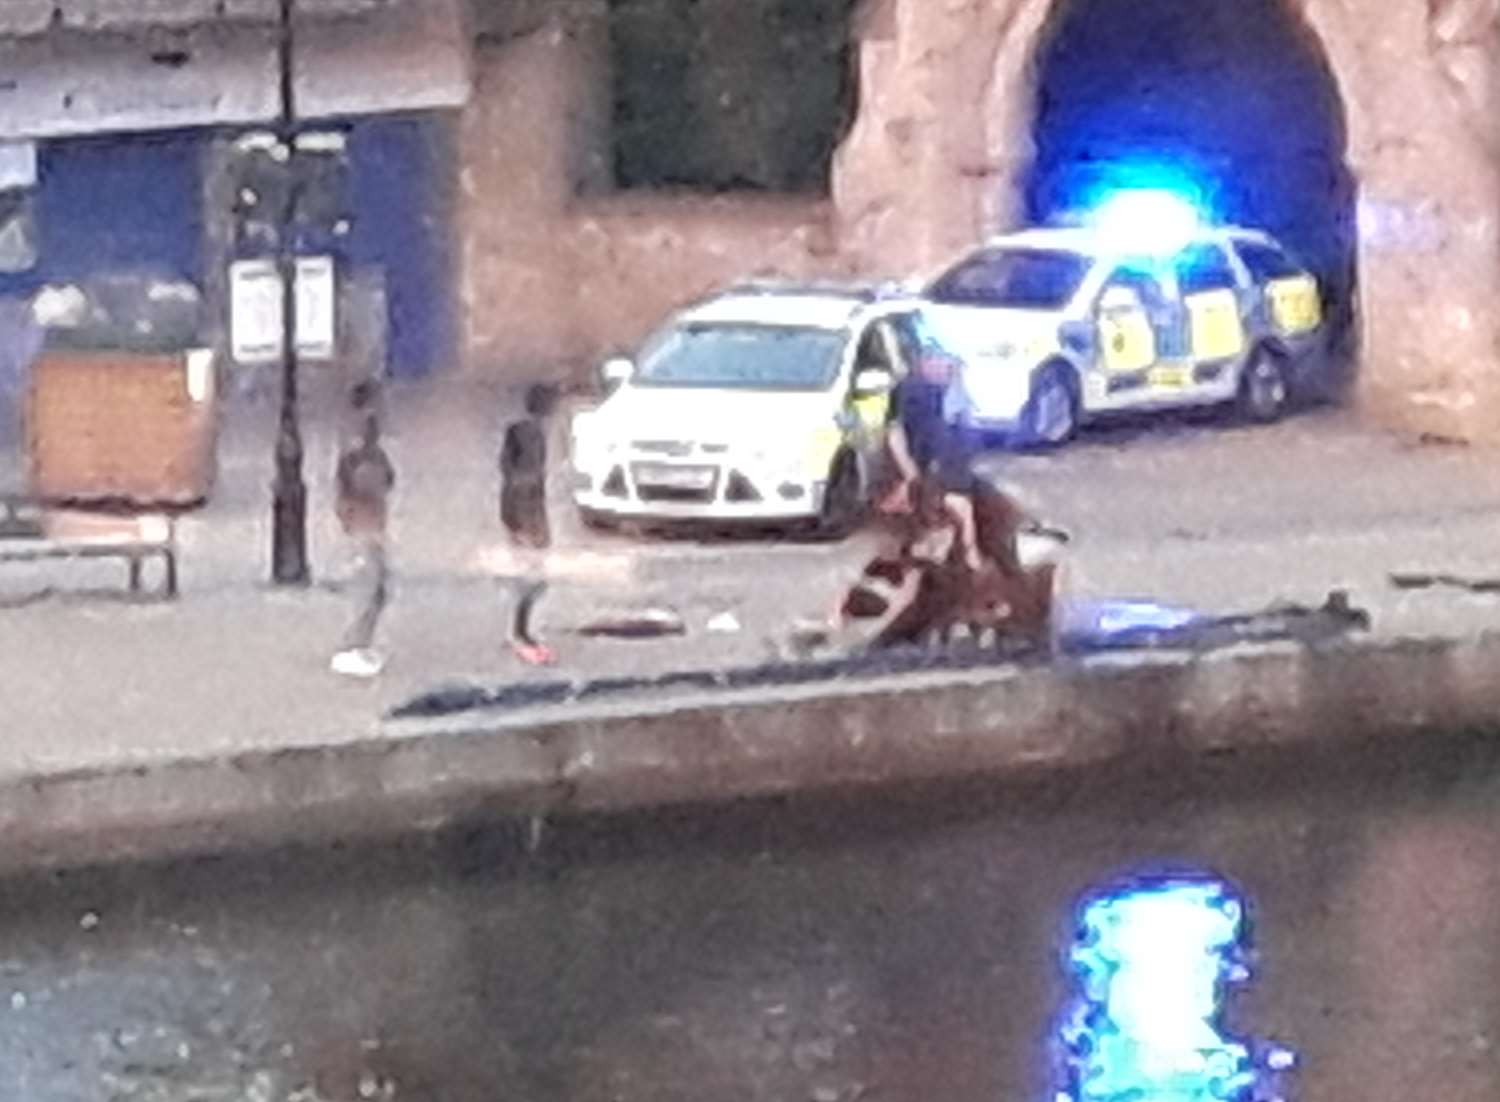 Police helped with the rescue